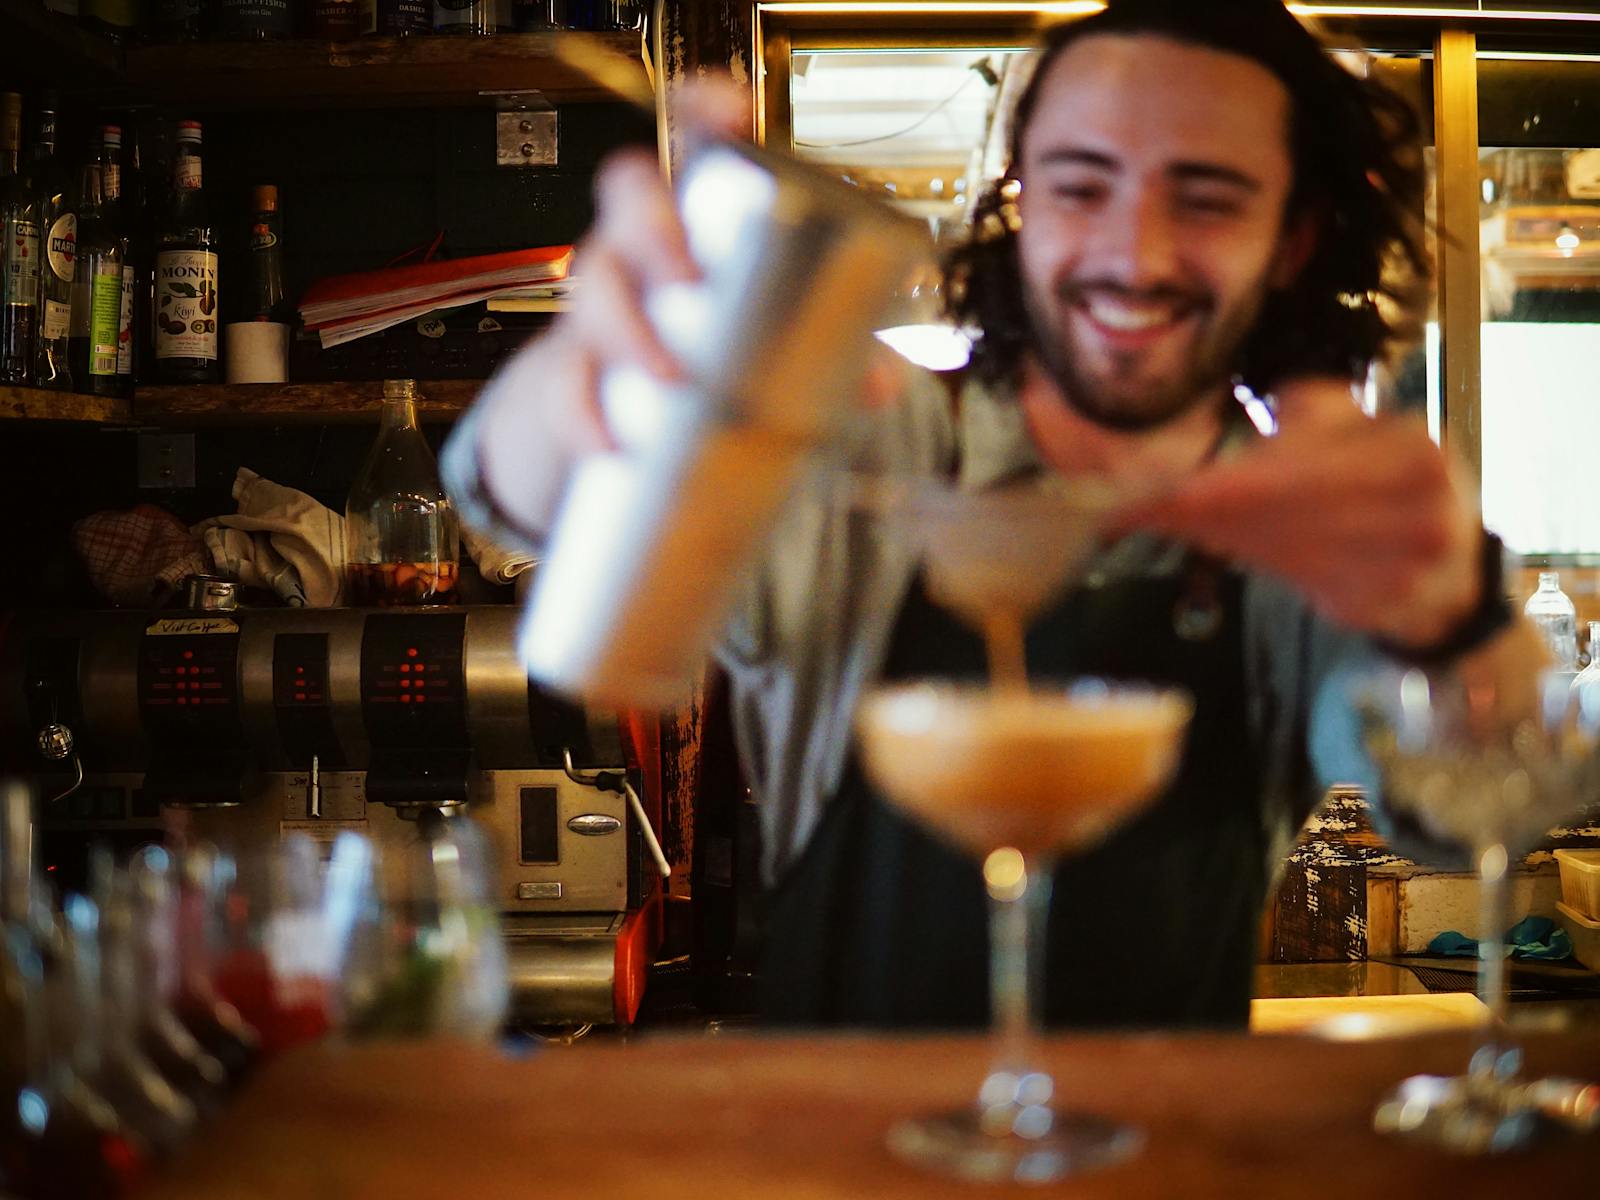 Bartender is smiling in focus, while out-of-focus pours liquid from a cocktail shaker into a coupe